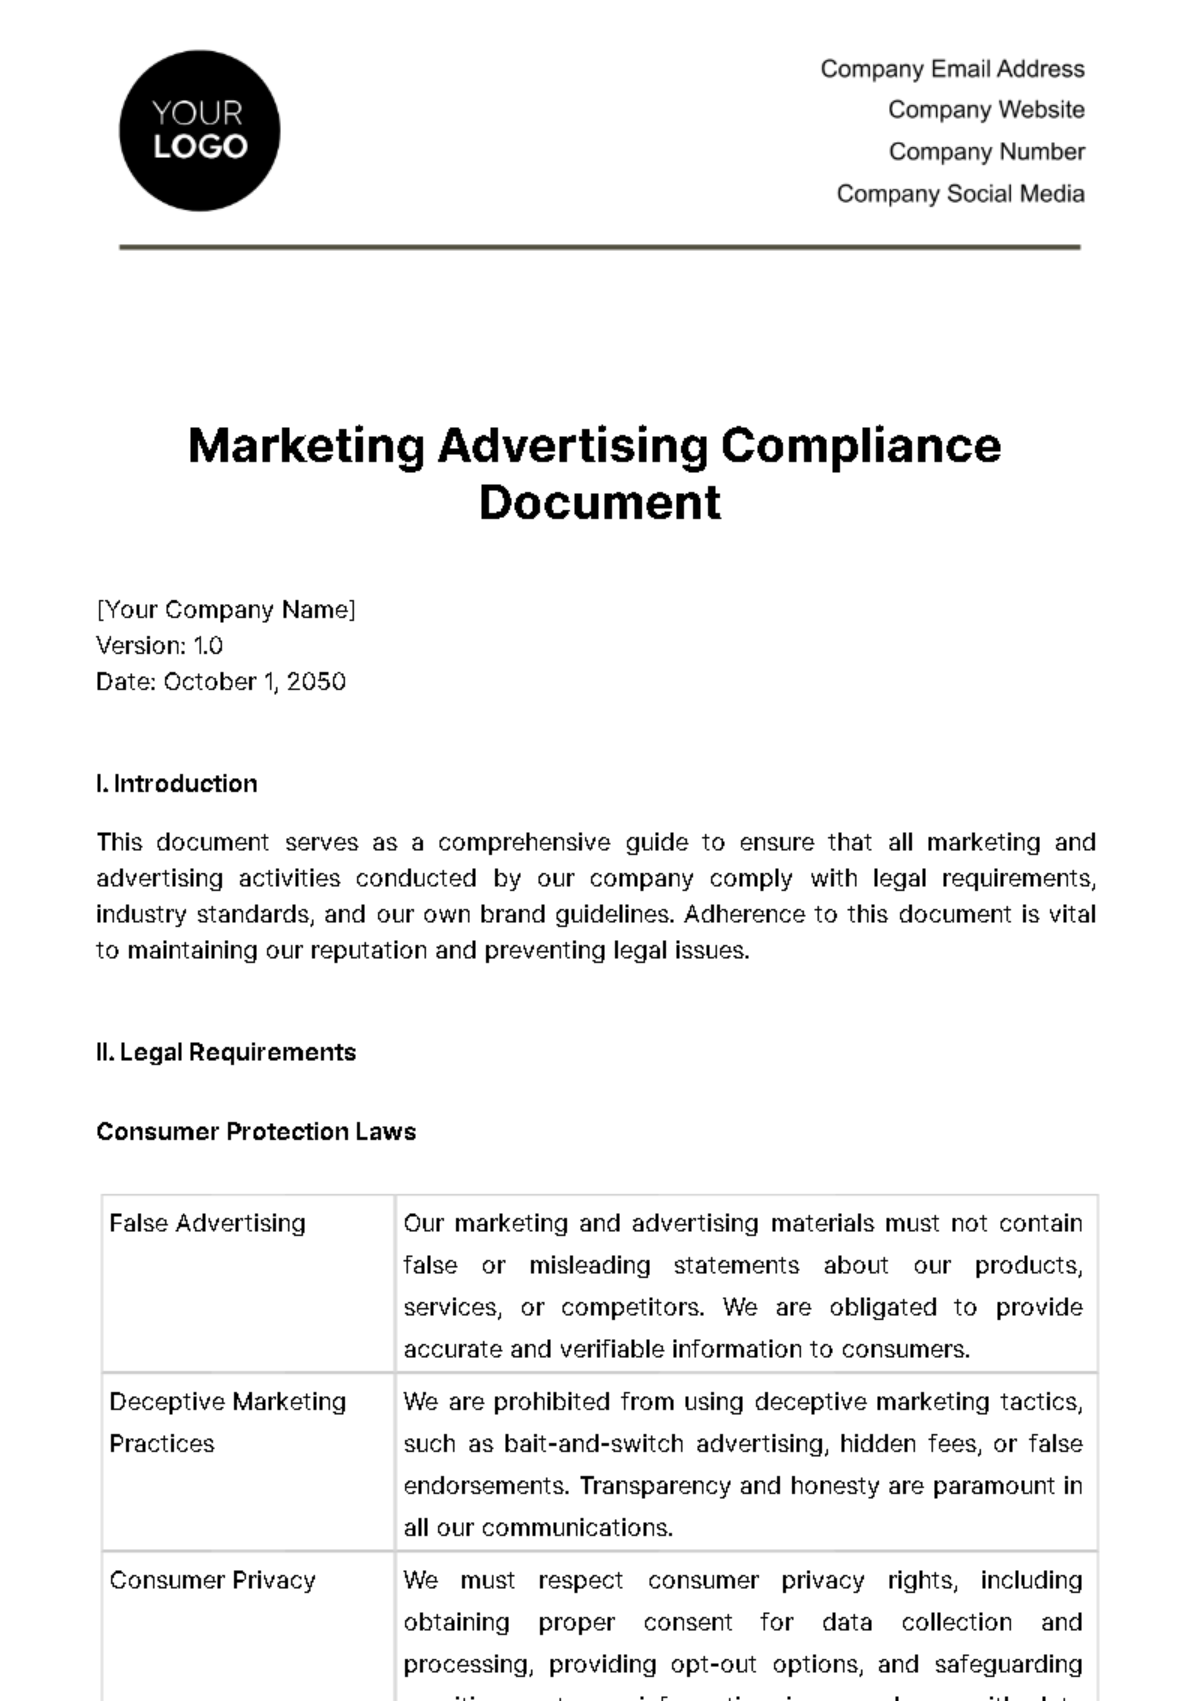 Marketing Advertising Compliance Document Template